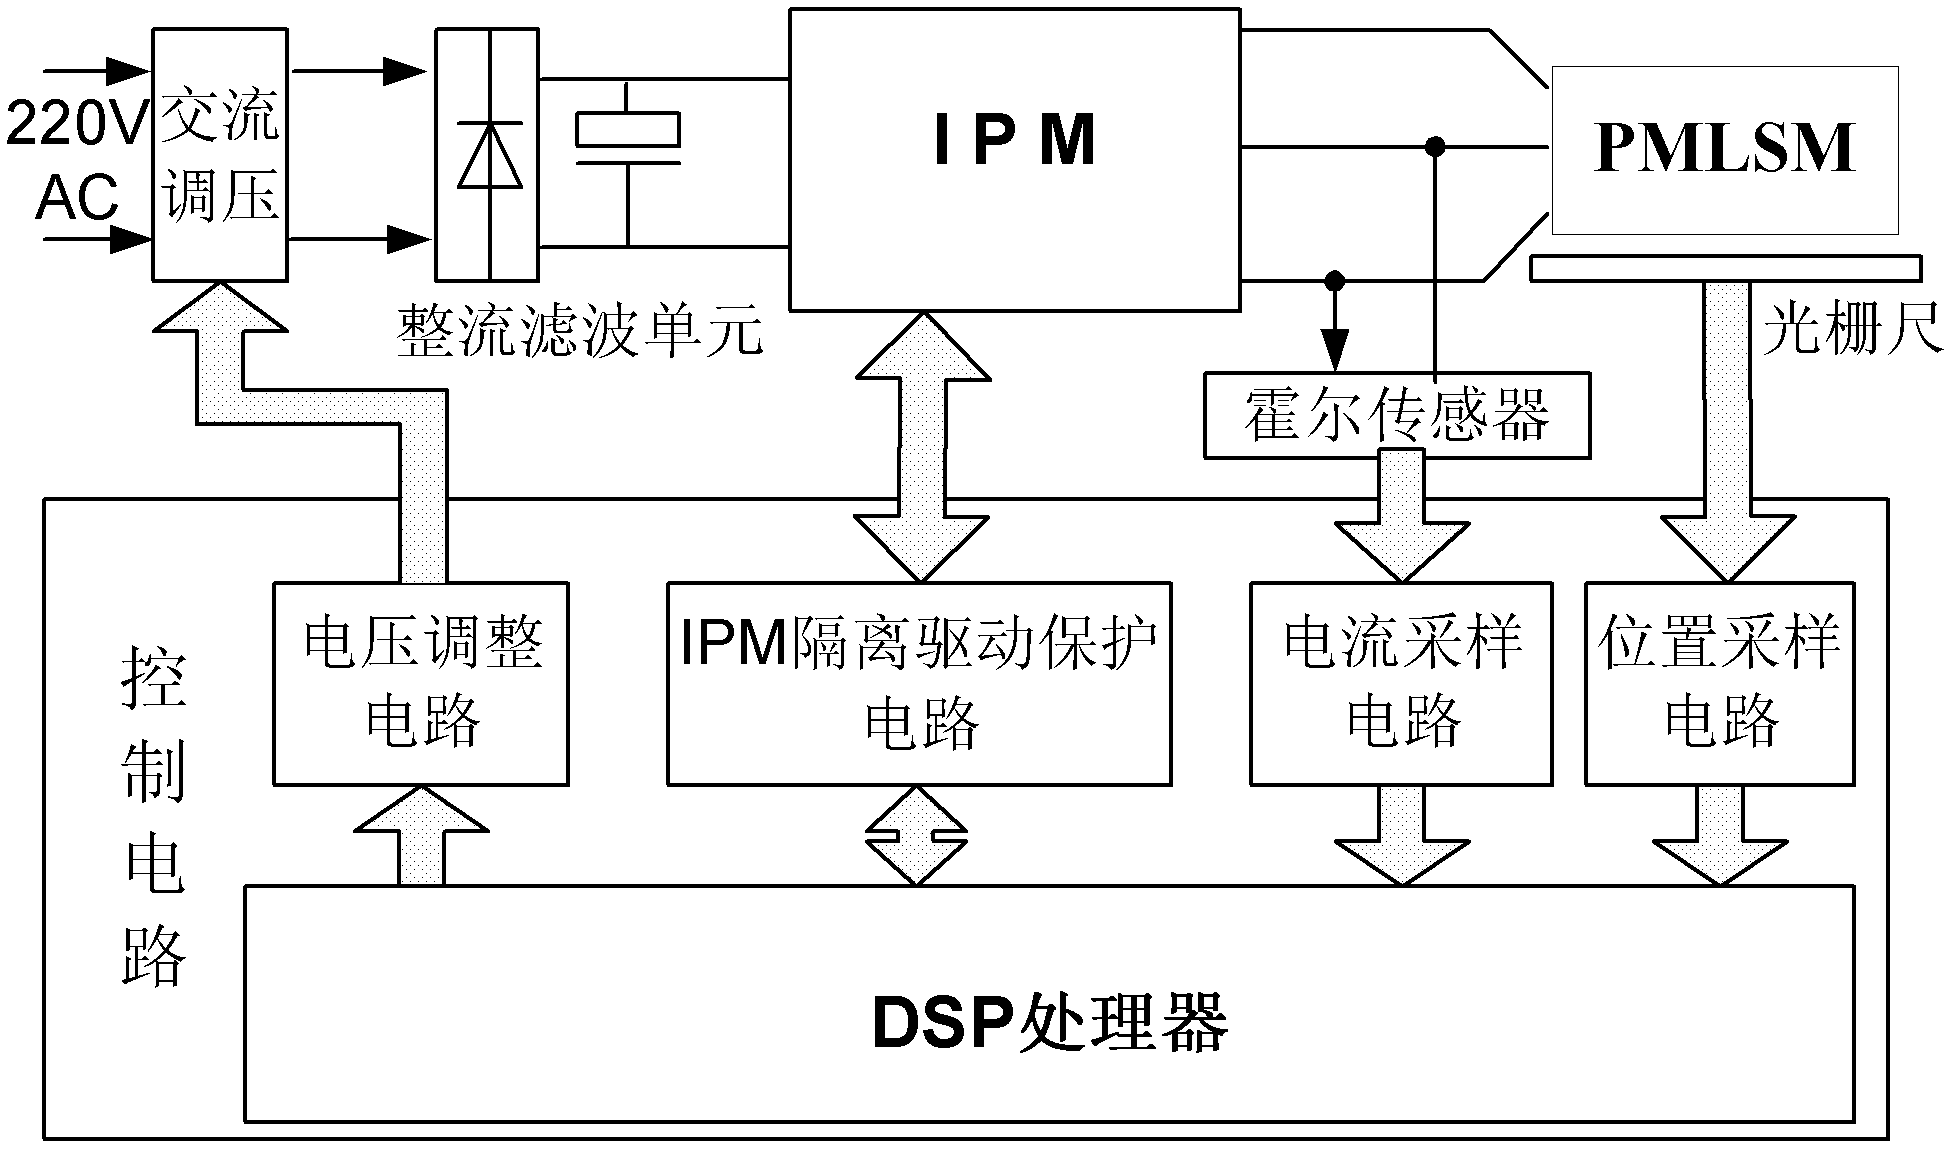 Robust control method for directly driving numerical control platform based on coordinate transformation and parameter adjustment